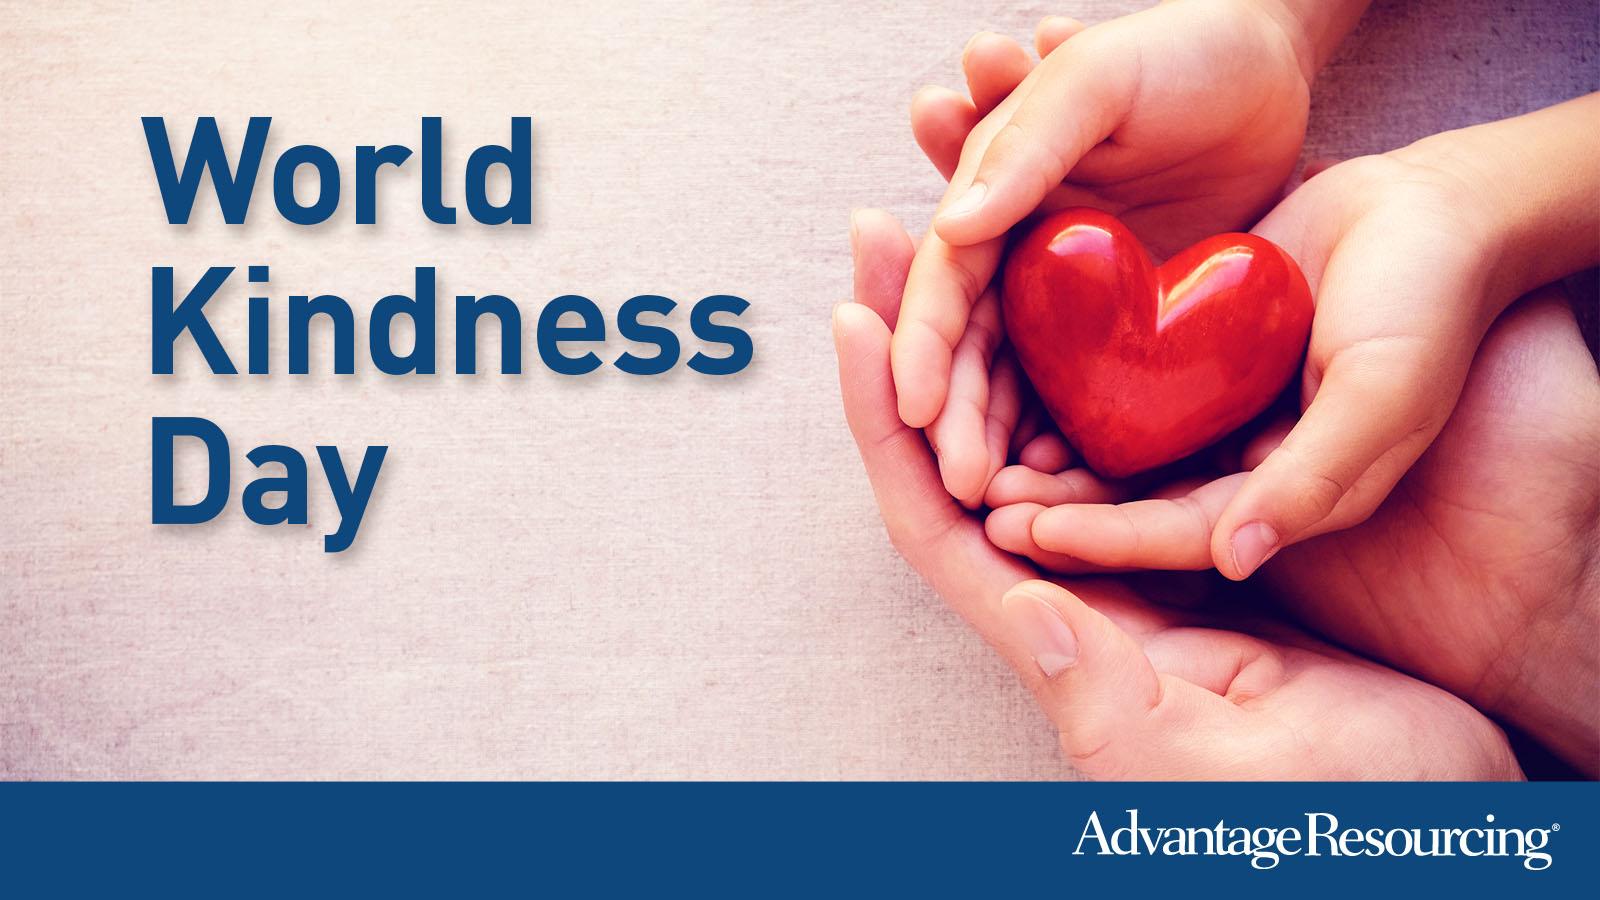 Kindness in the Workplace: 10 Simple Ways to Show You Care